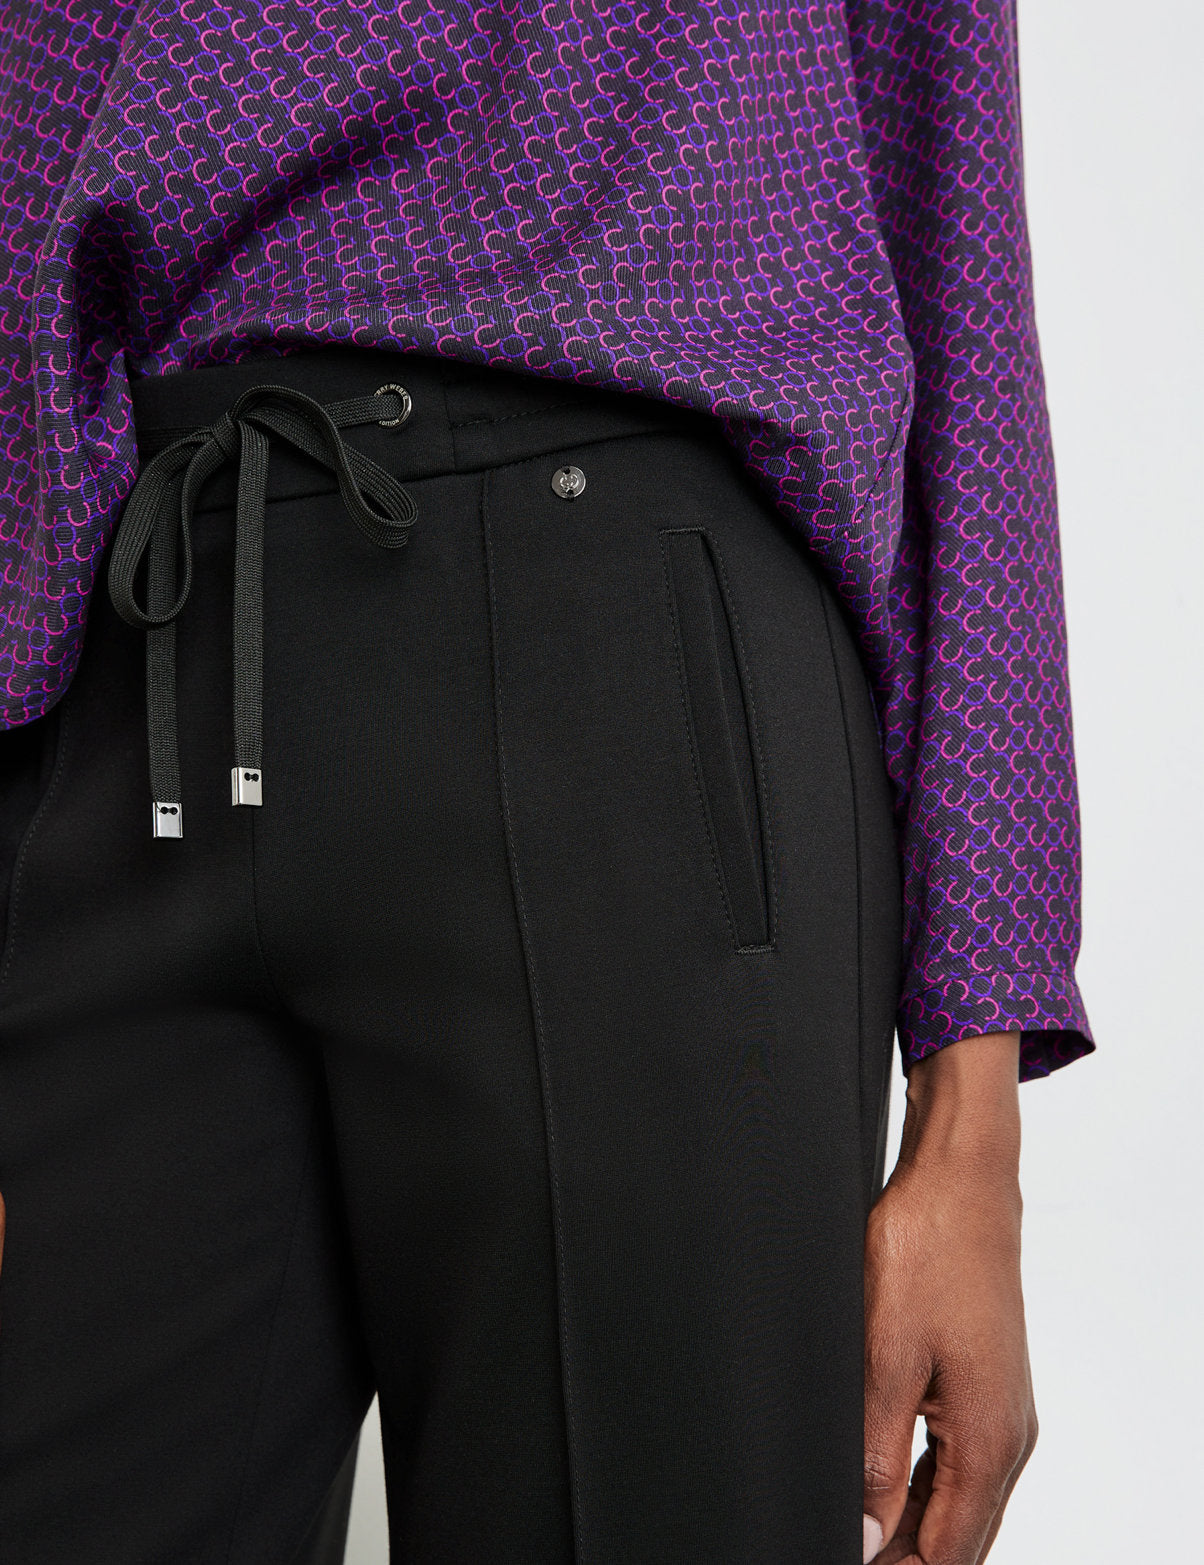 Fashionable Cloth Trousers With A Wide Leg, Vertical Pintucks And An Elasticated Waistband_122077-66211_11000_04